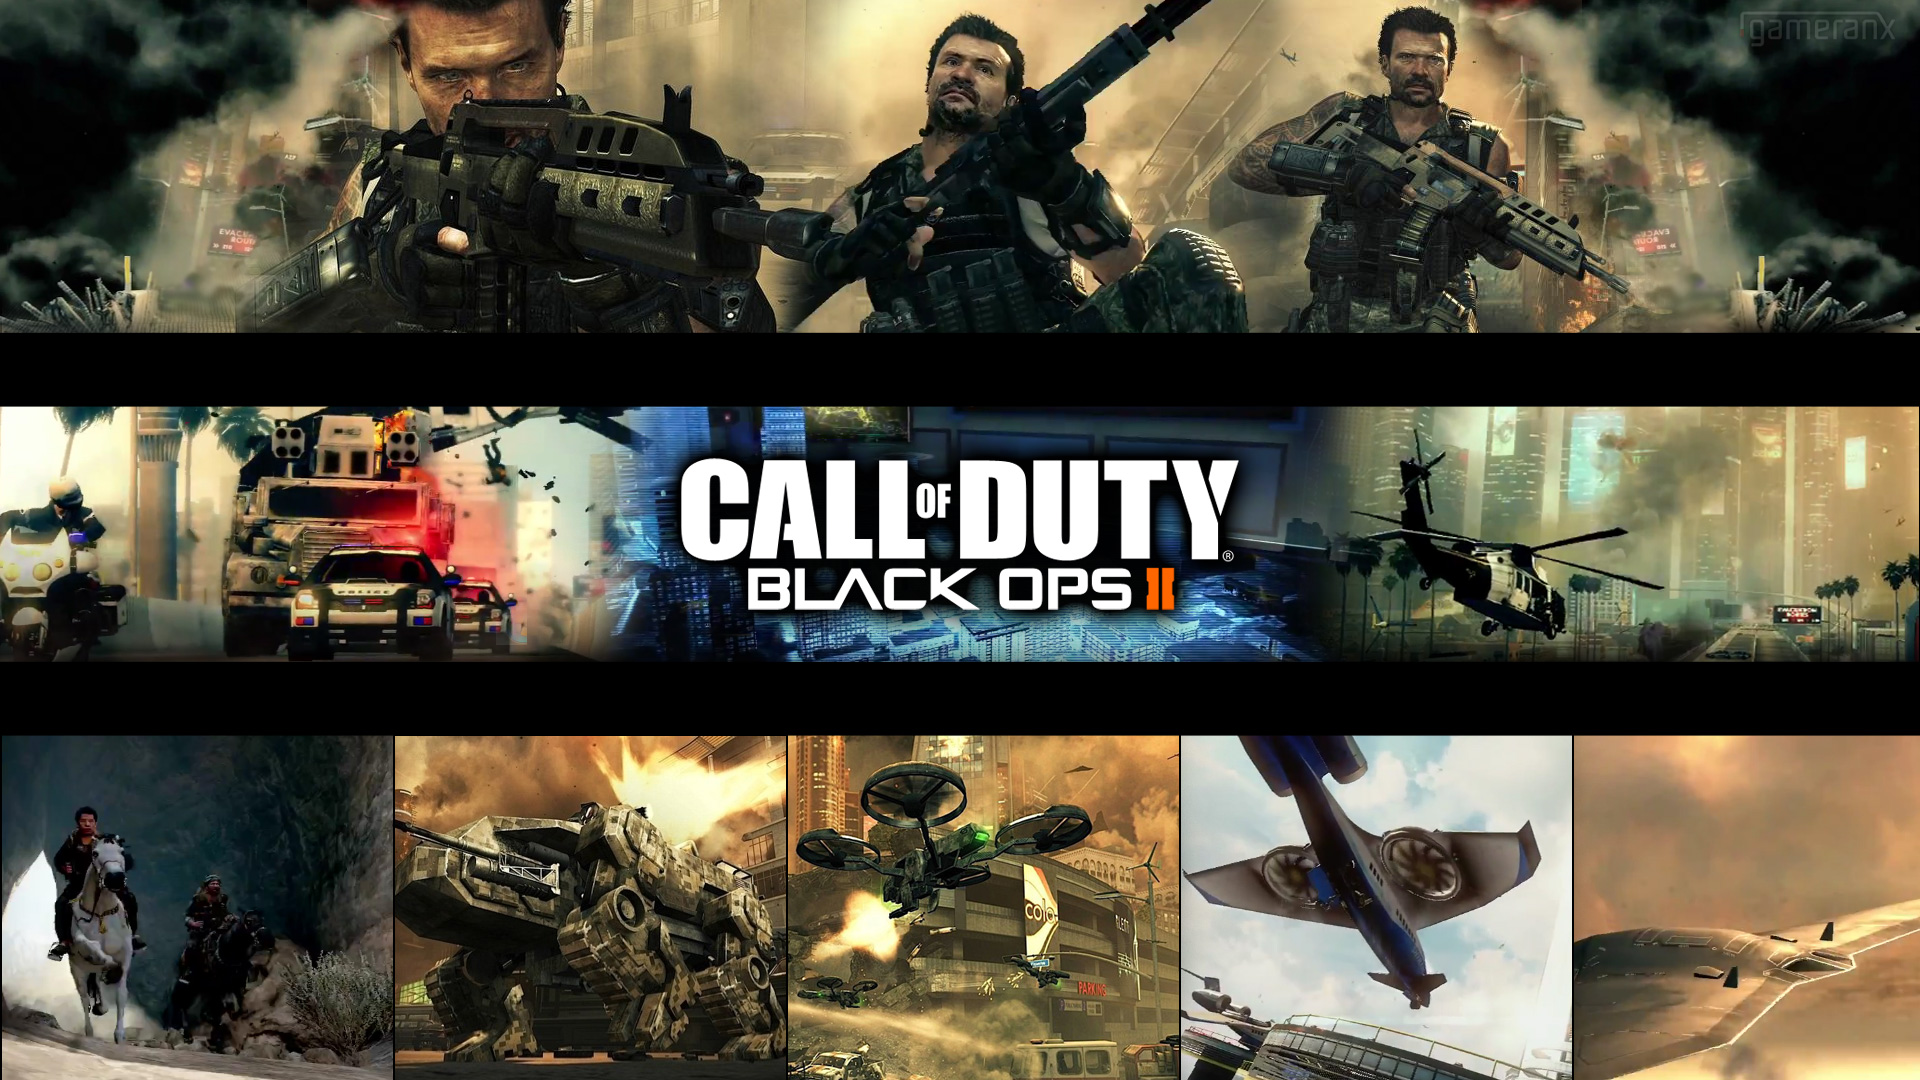 Black Ops 2 Wallpapers in HD Page 2